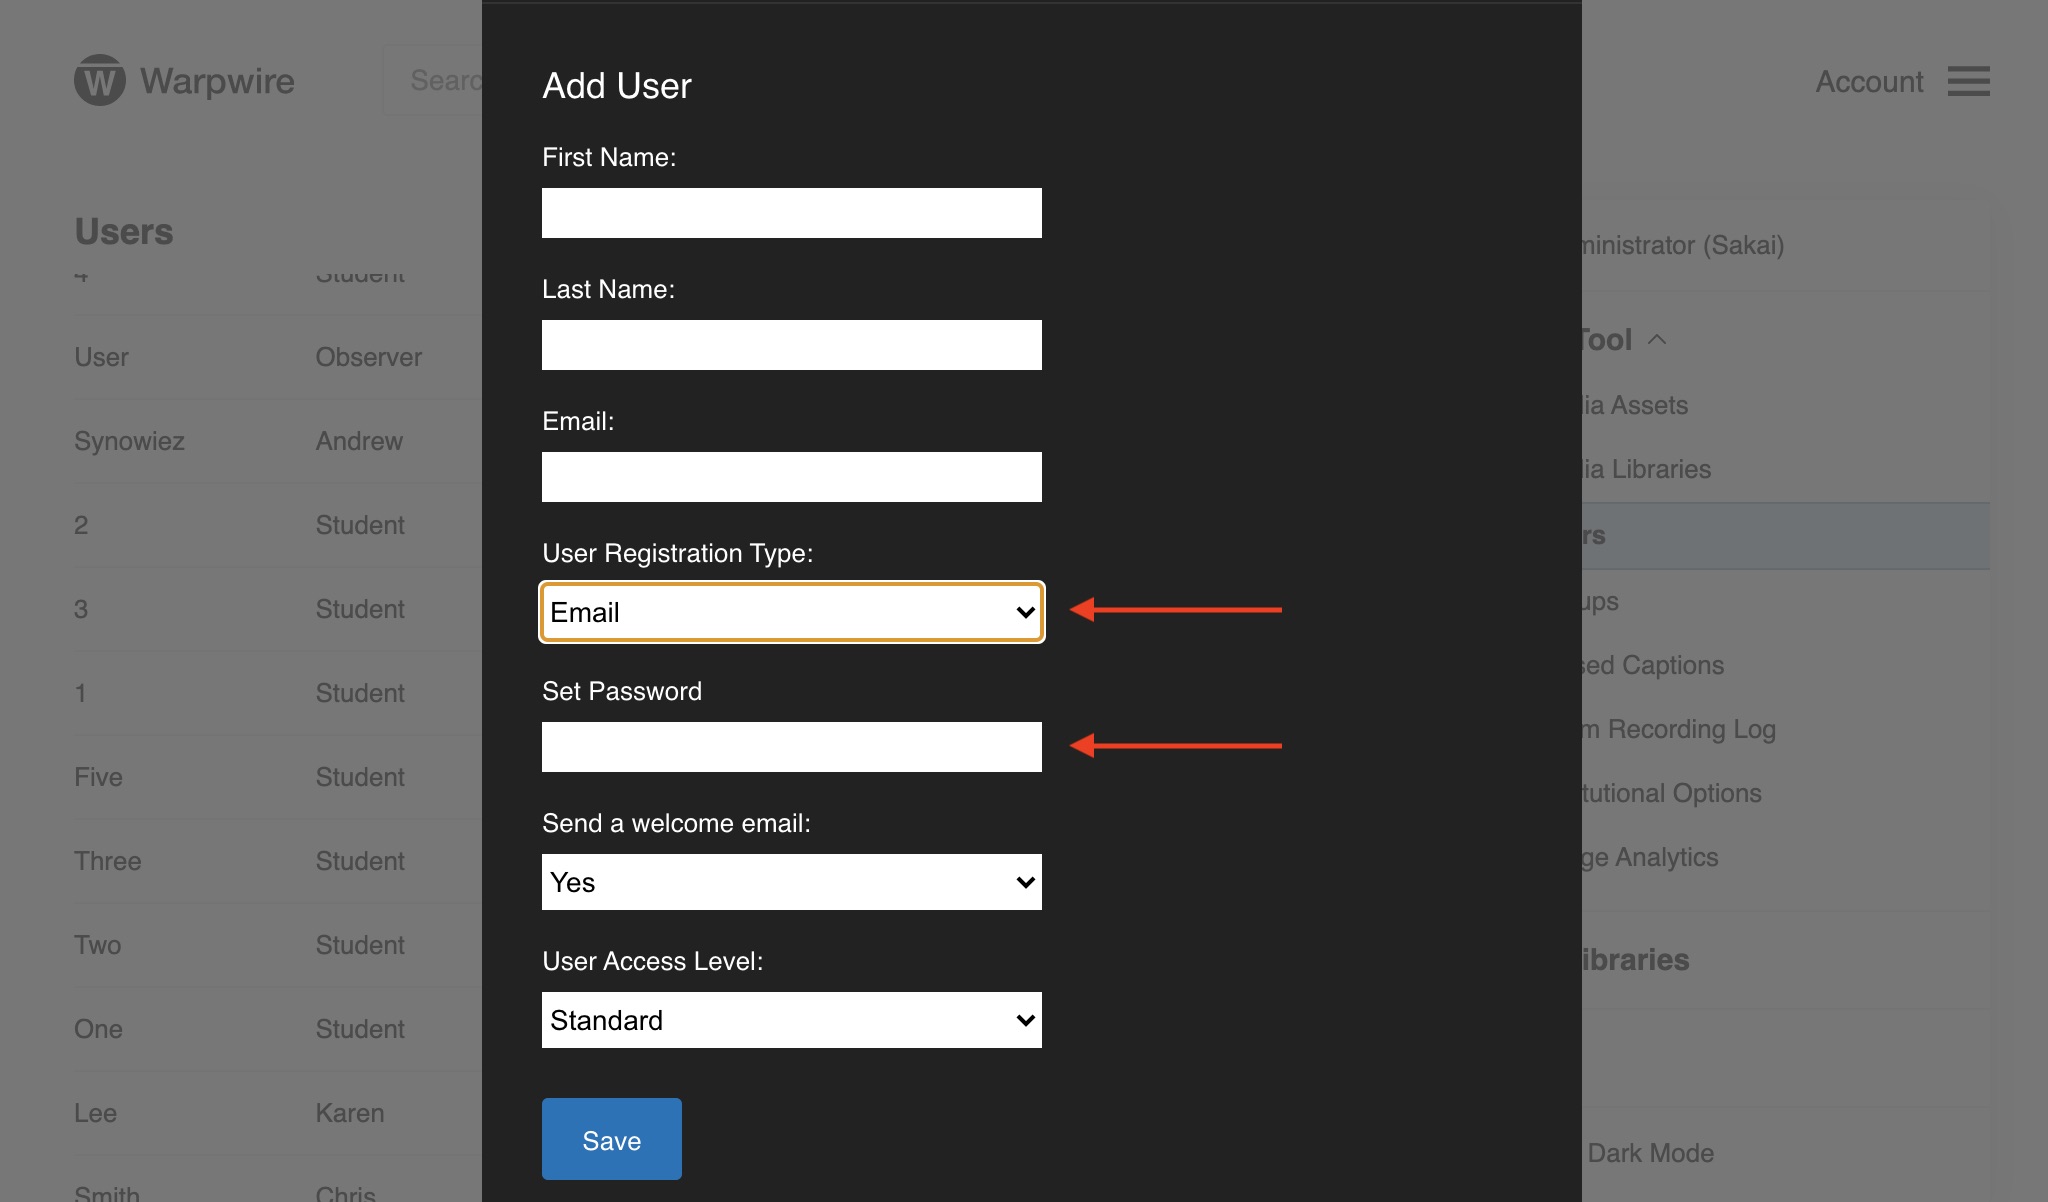 panel showing user input fields to create a user within the Warpwire video platform